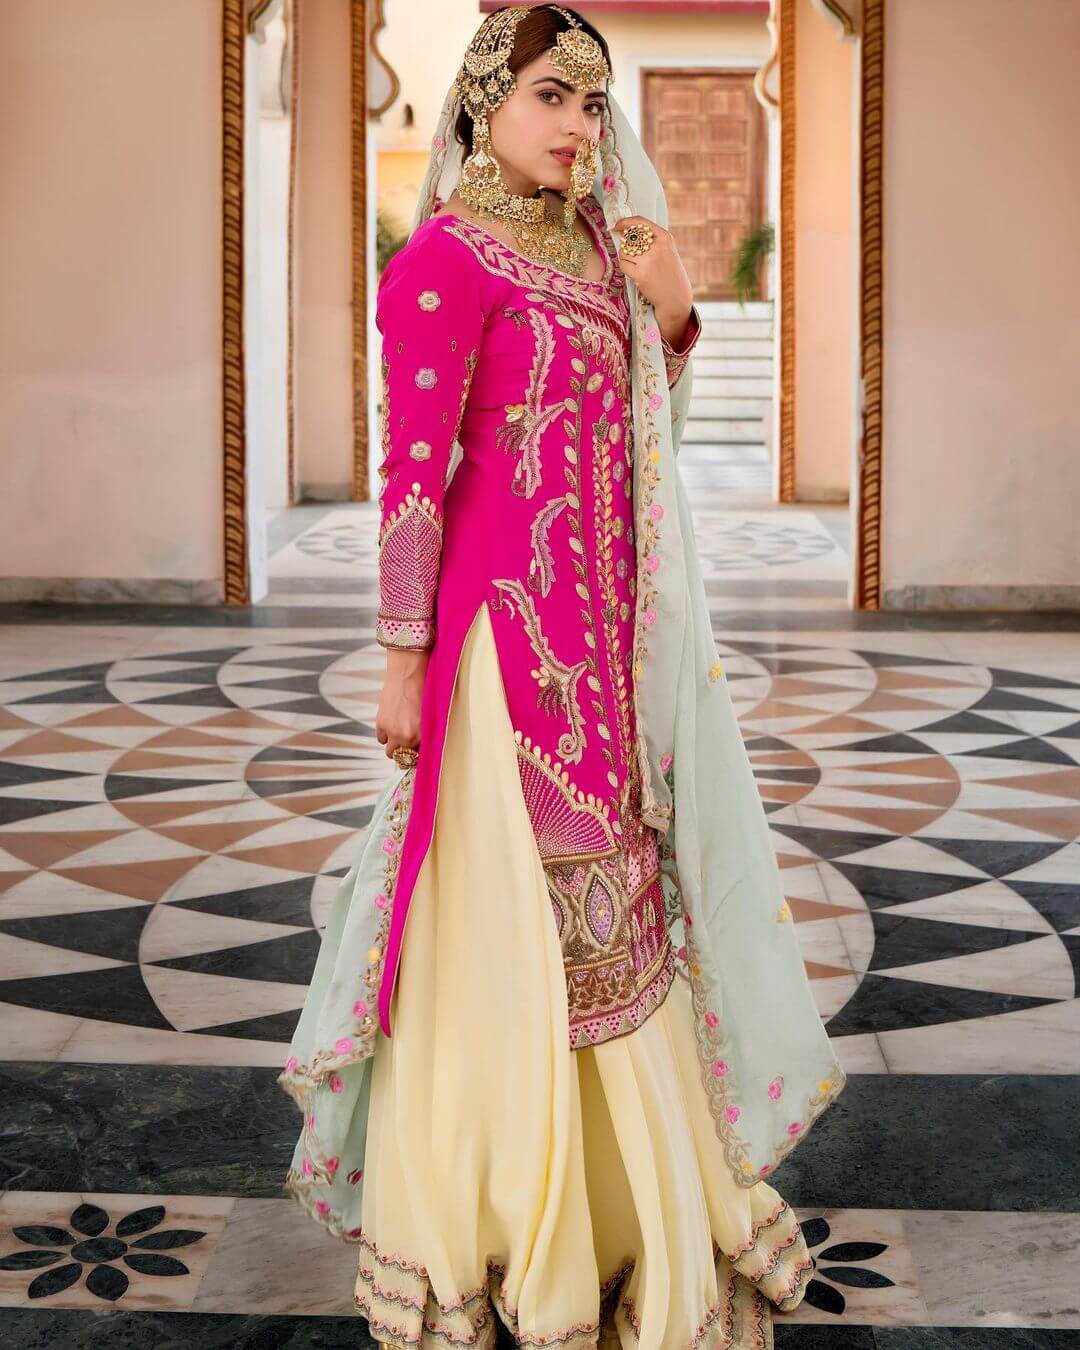 Simi Chahal Gives Us Bridal Vibes In Pink Kurta Palazzo With Heavy Jewellery